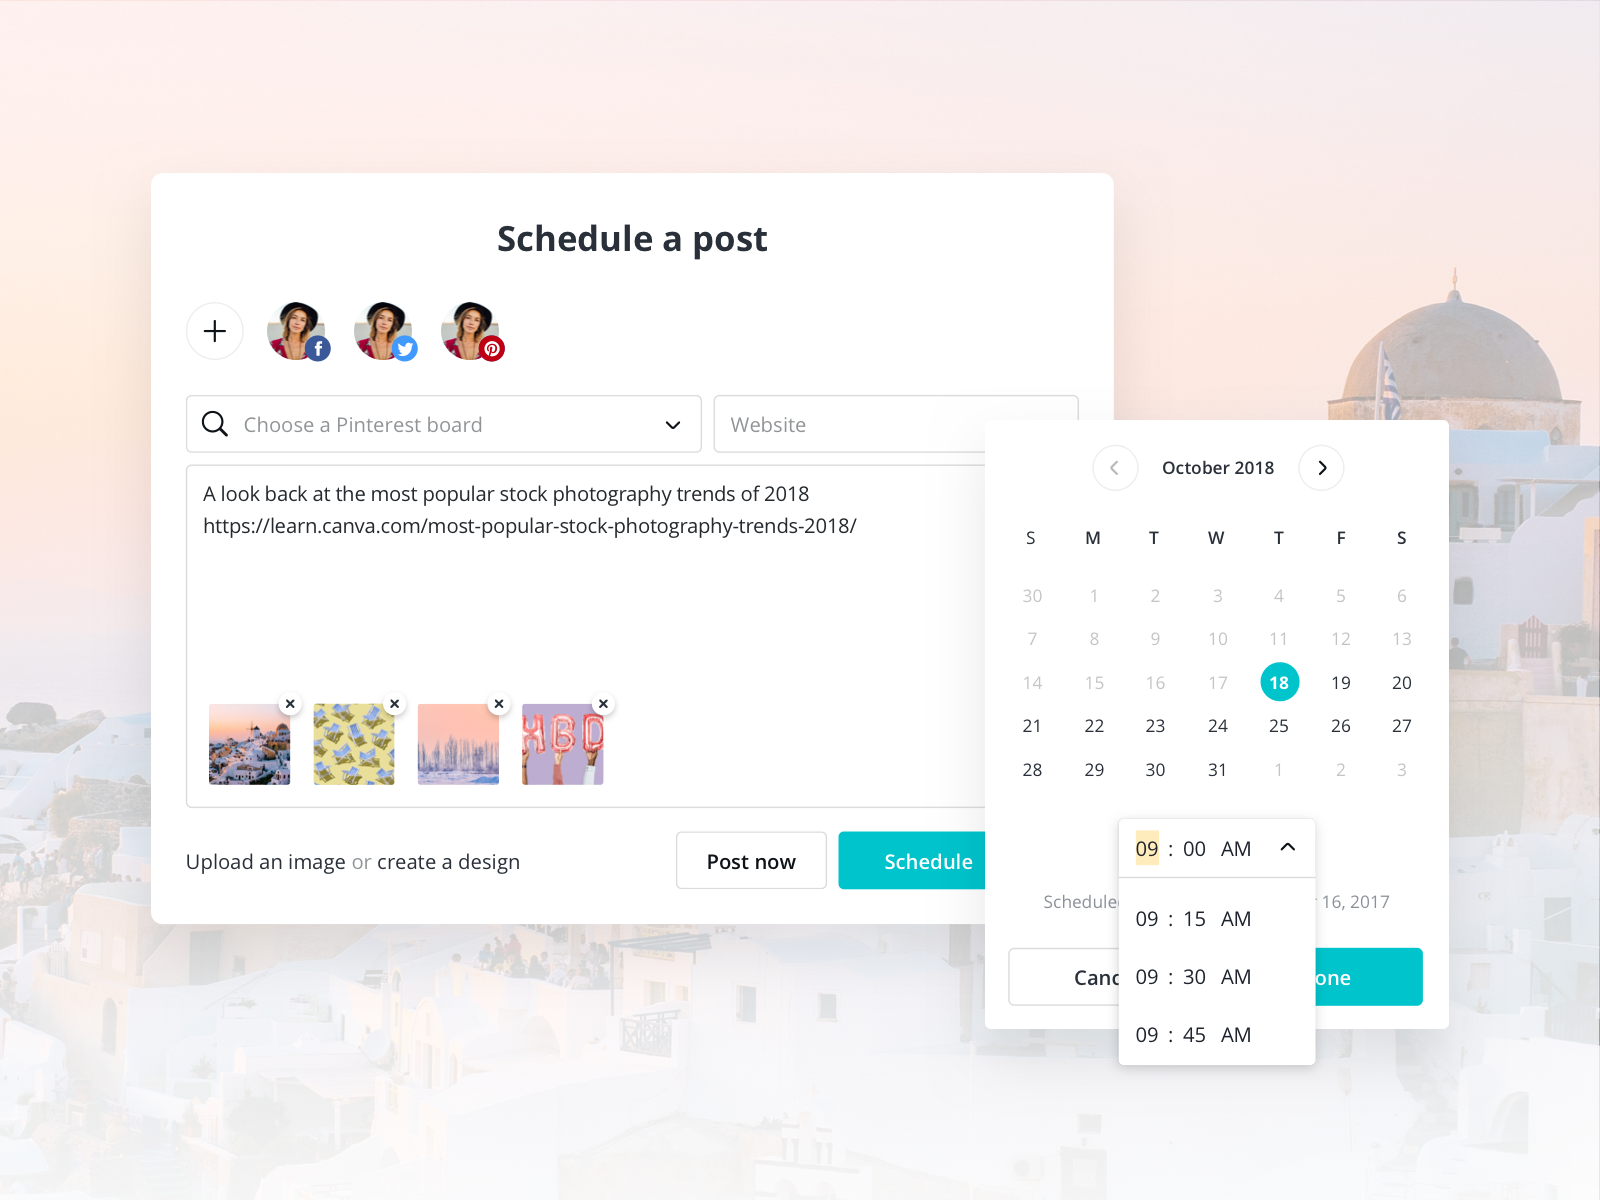 canva-schedule-post-editor-by-matt-hardy-for-canva-on-dribbble